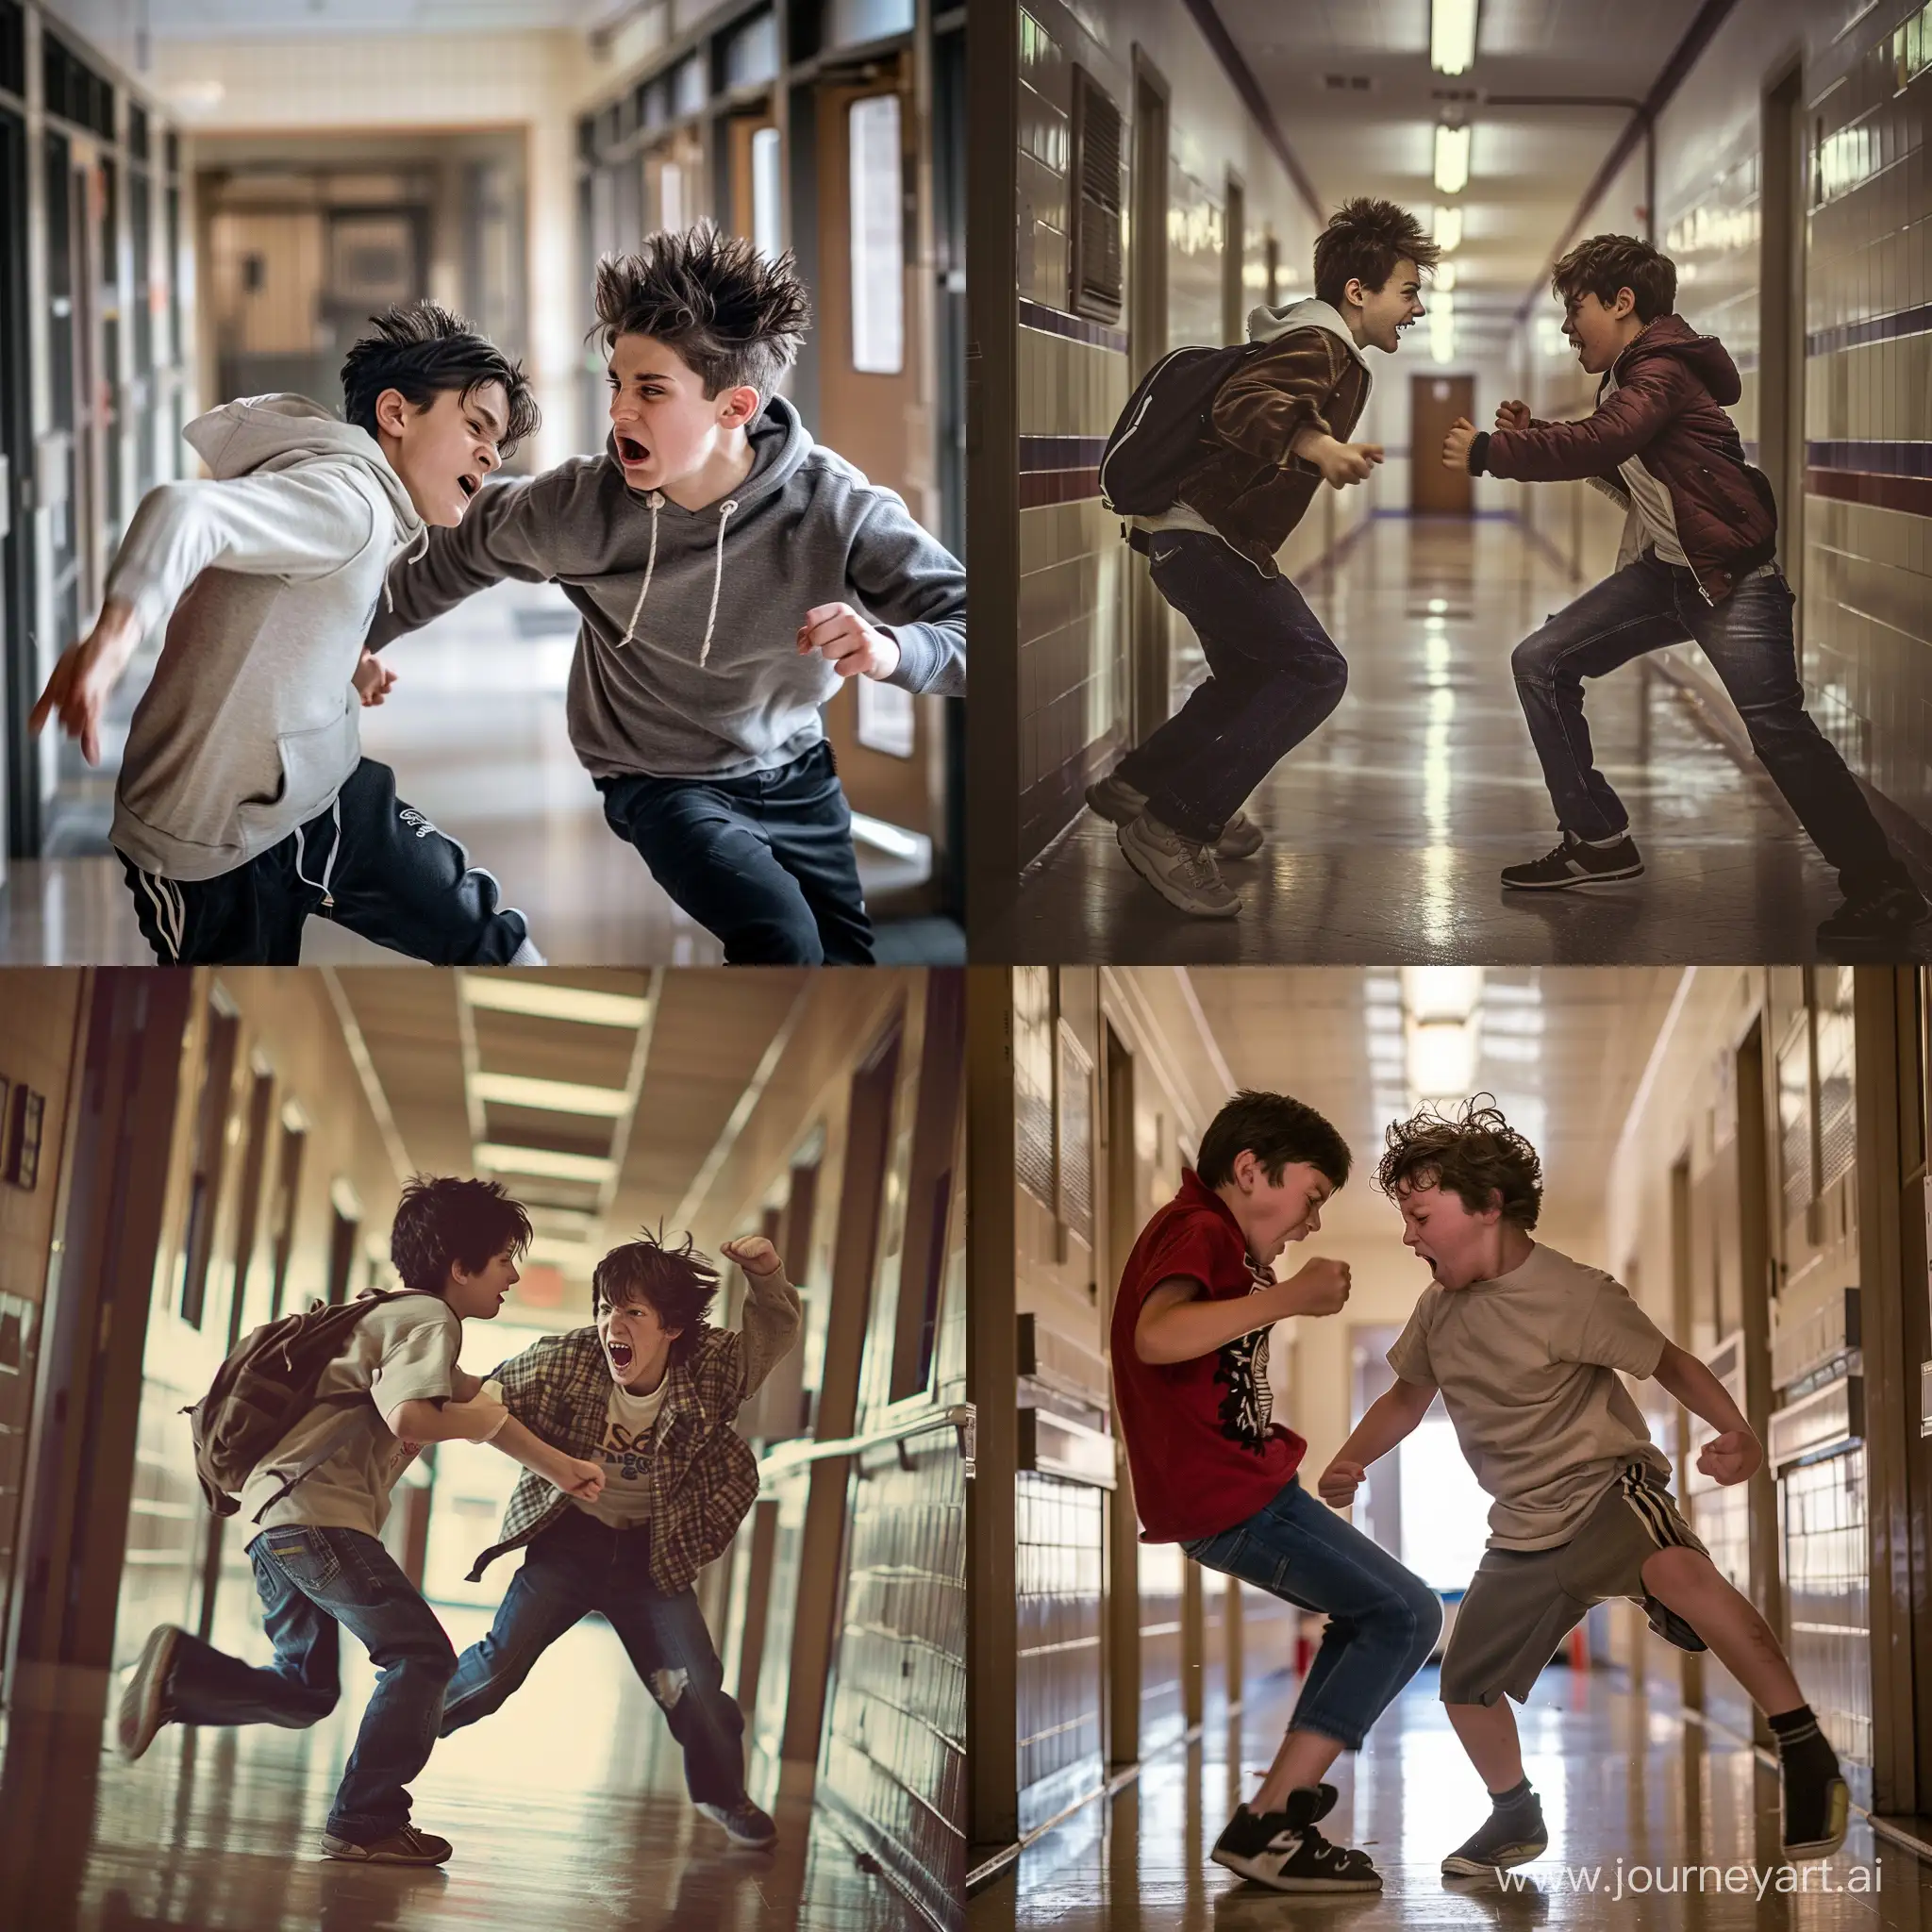 an epic photo of two boys fighting on the hallway in the school